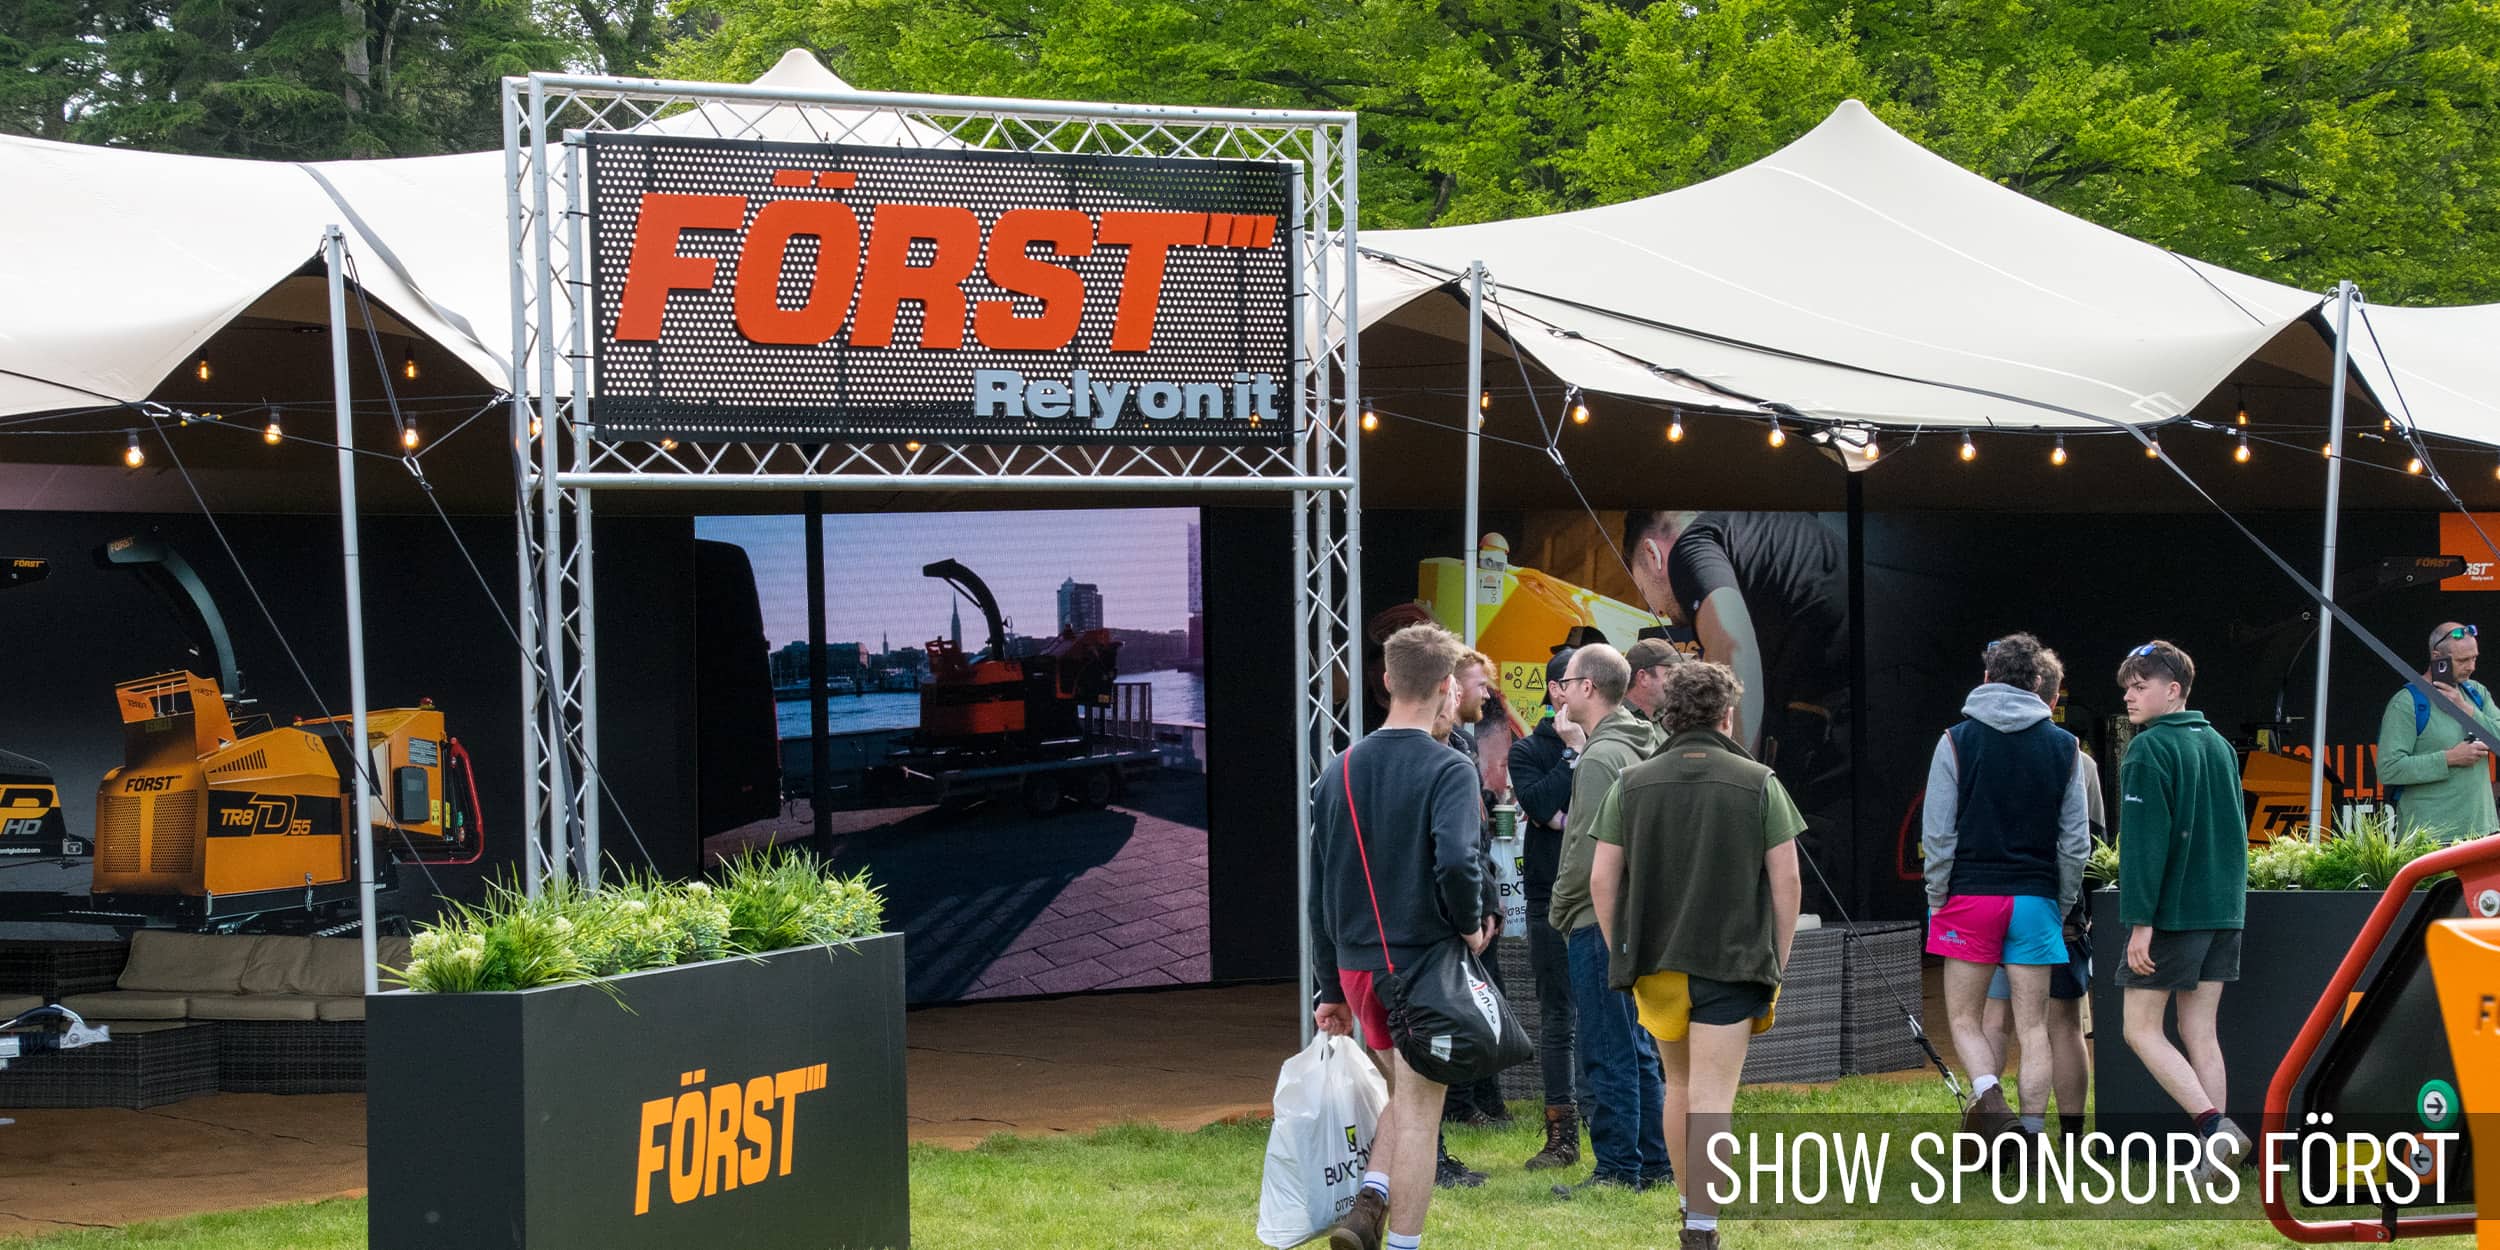 The ARB Show sponsors Först stand attacts plenty of attention